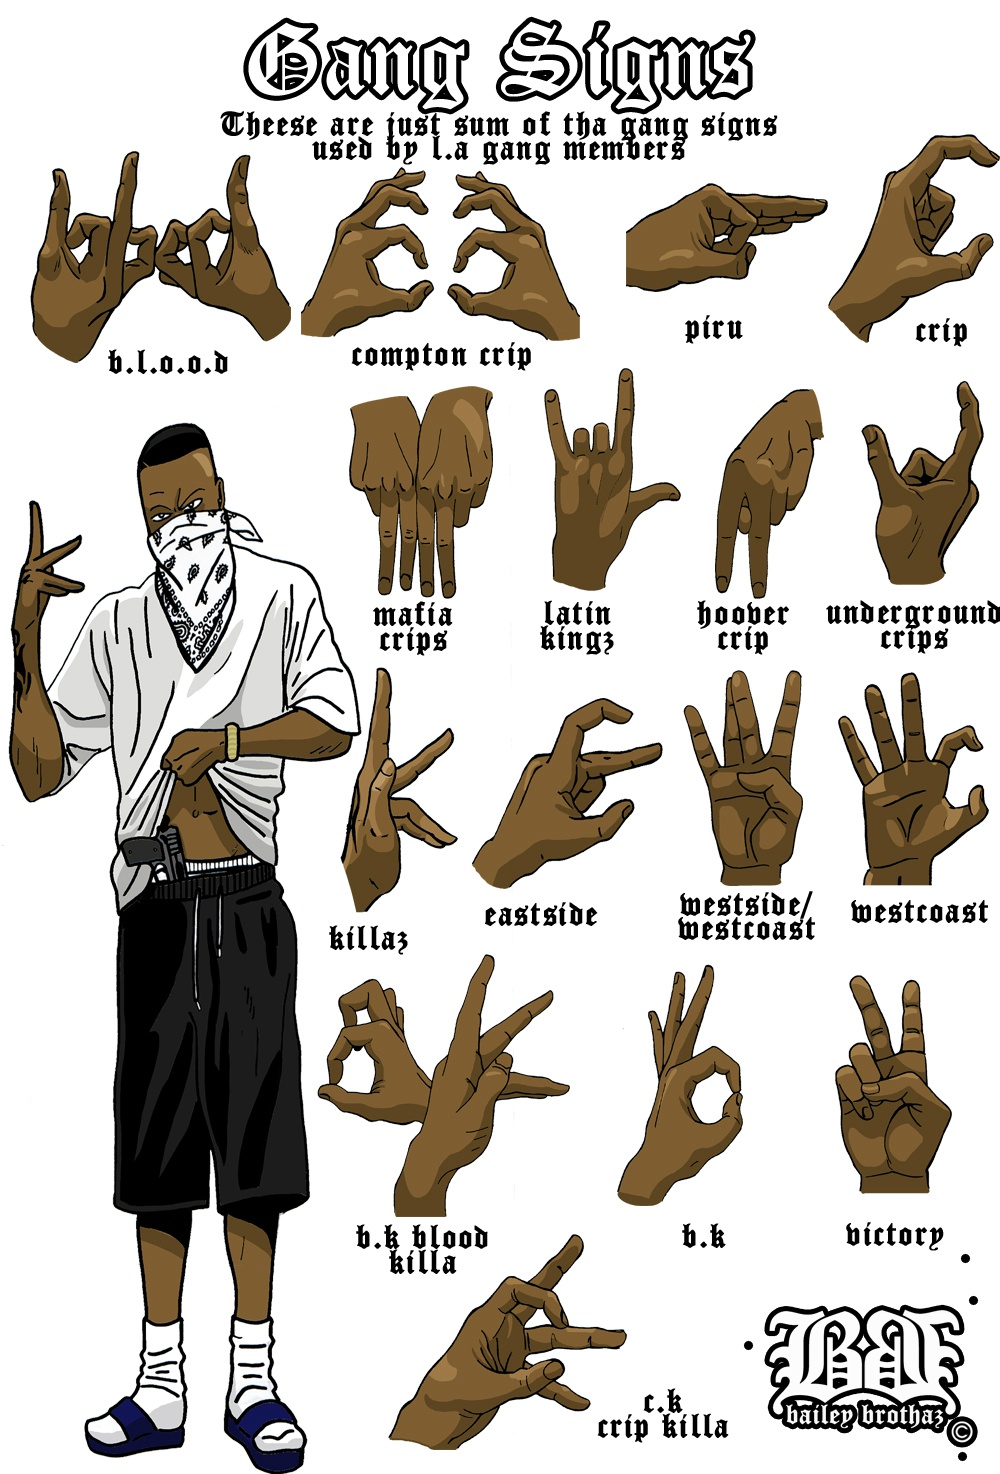 bloods hand signs